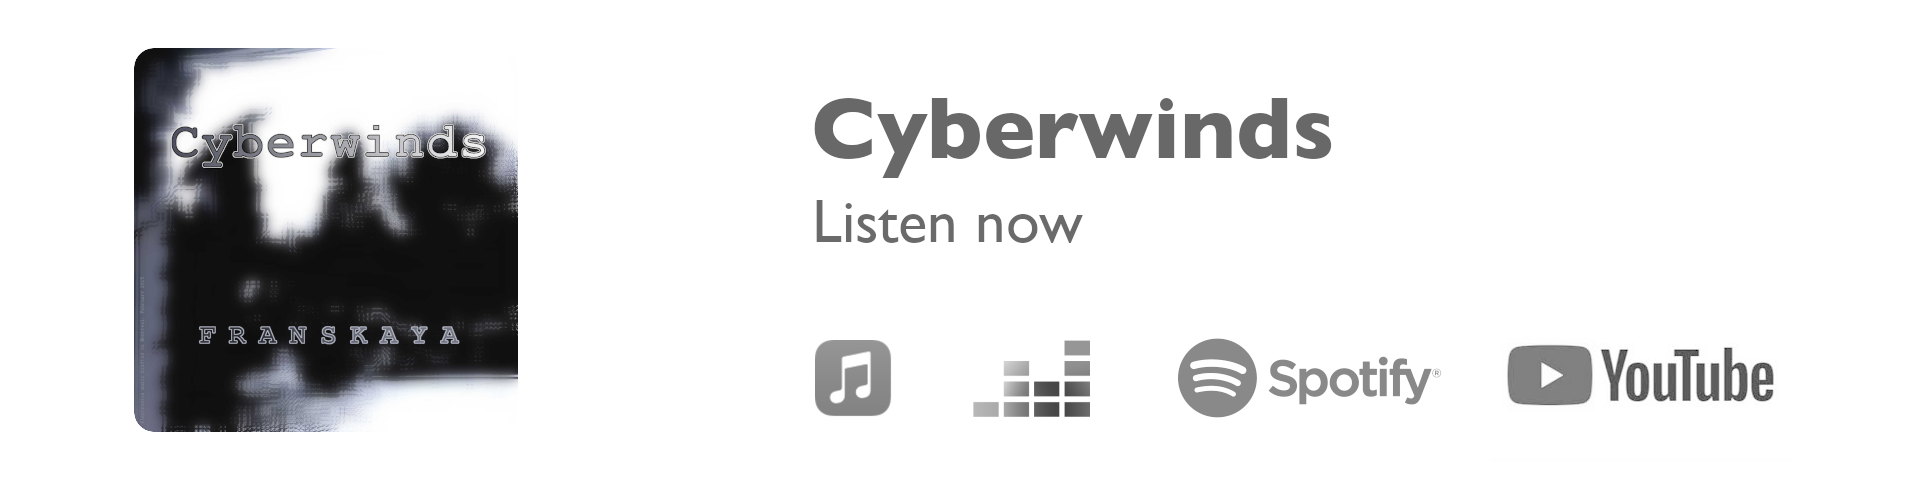 Clic to play Cyberwinds in the streaming platform of your choice